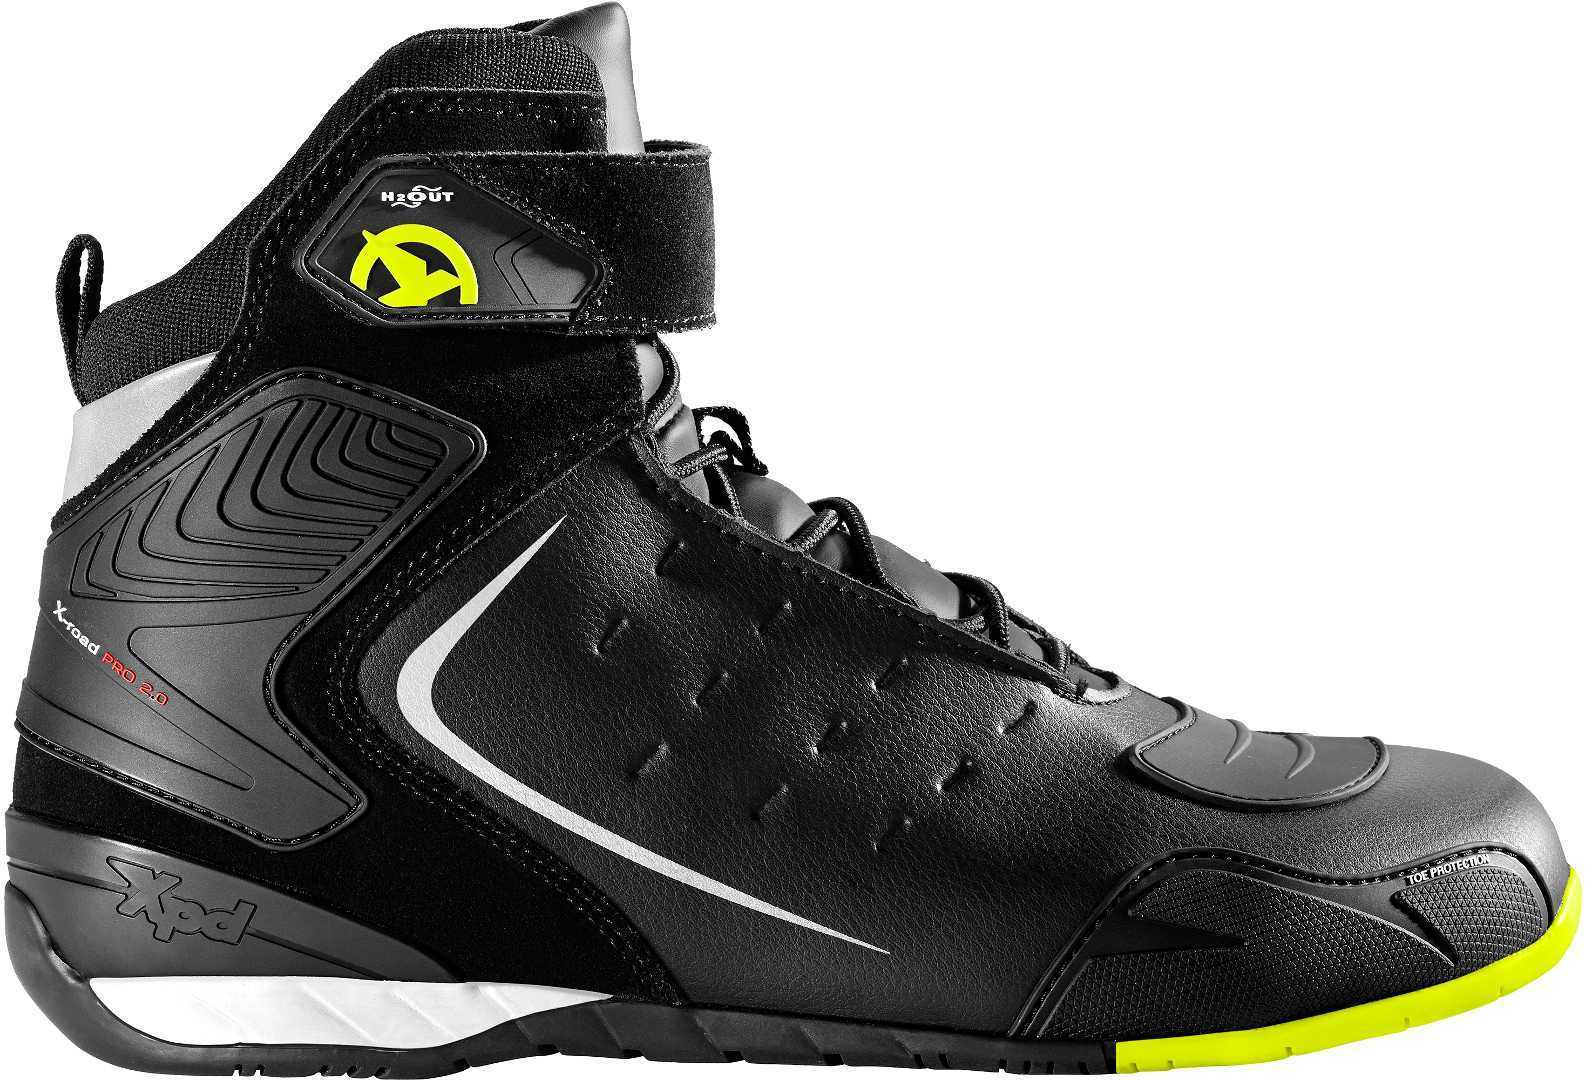 XPD X-Road H2Out Chaussures de moto Jaune taille : 40